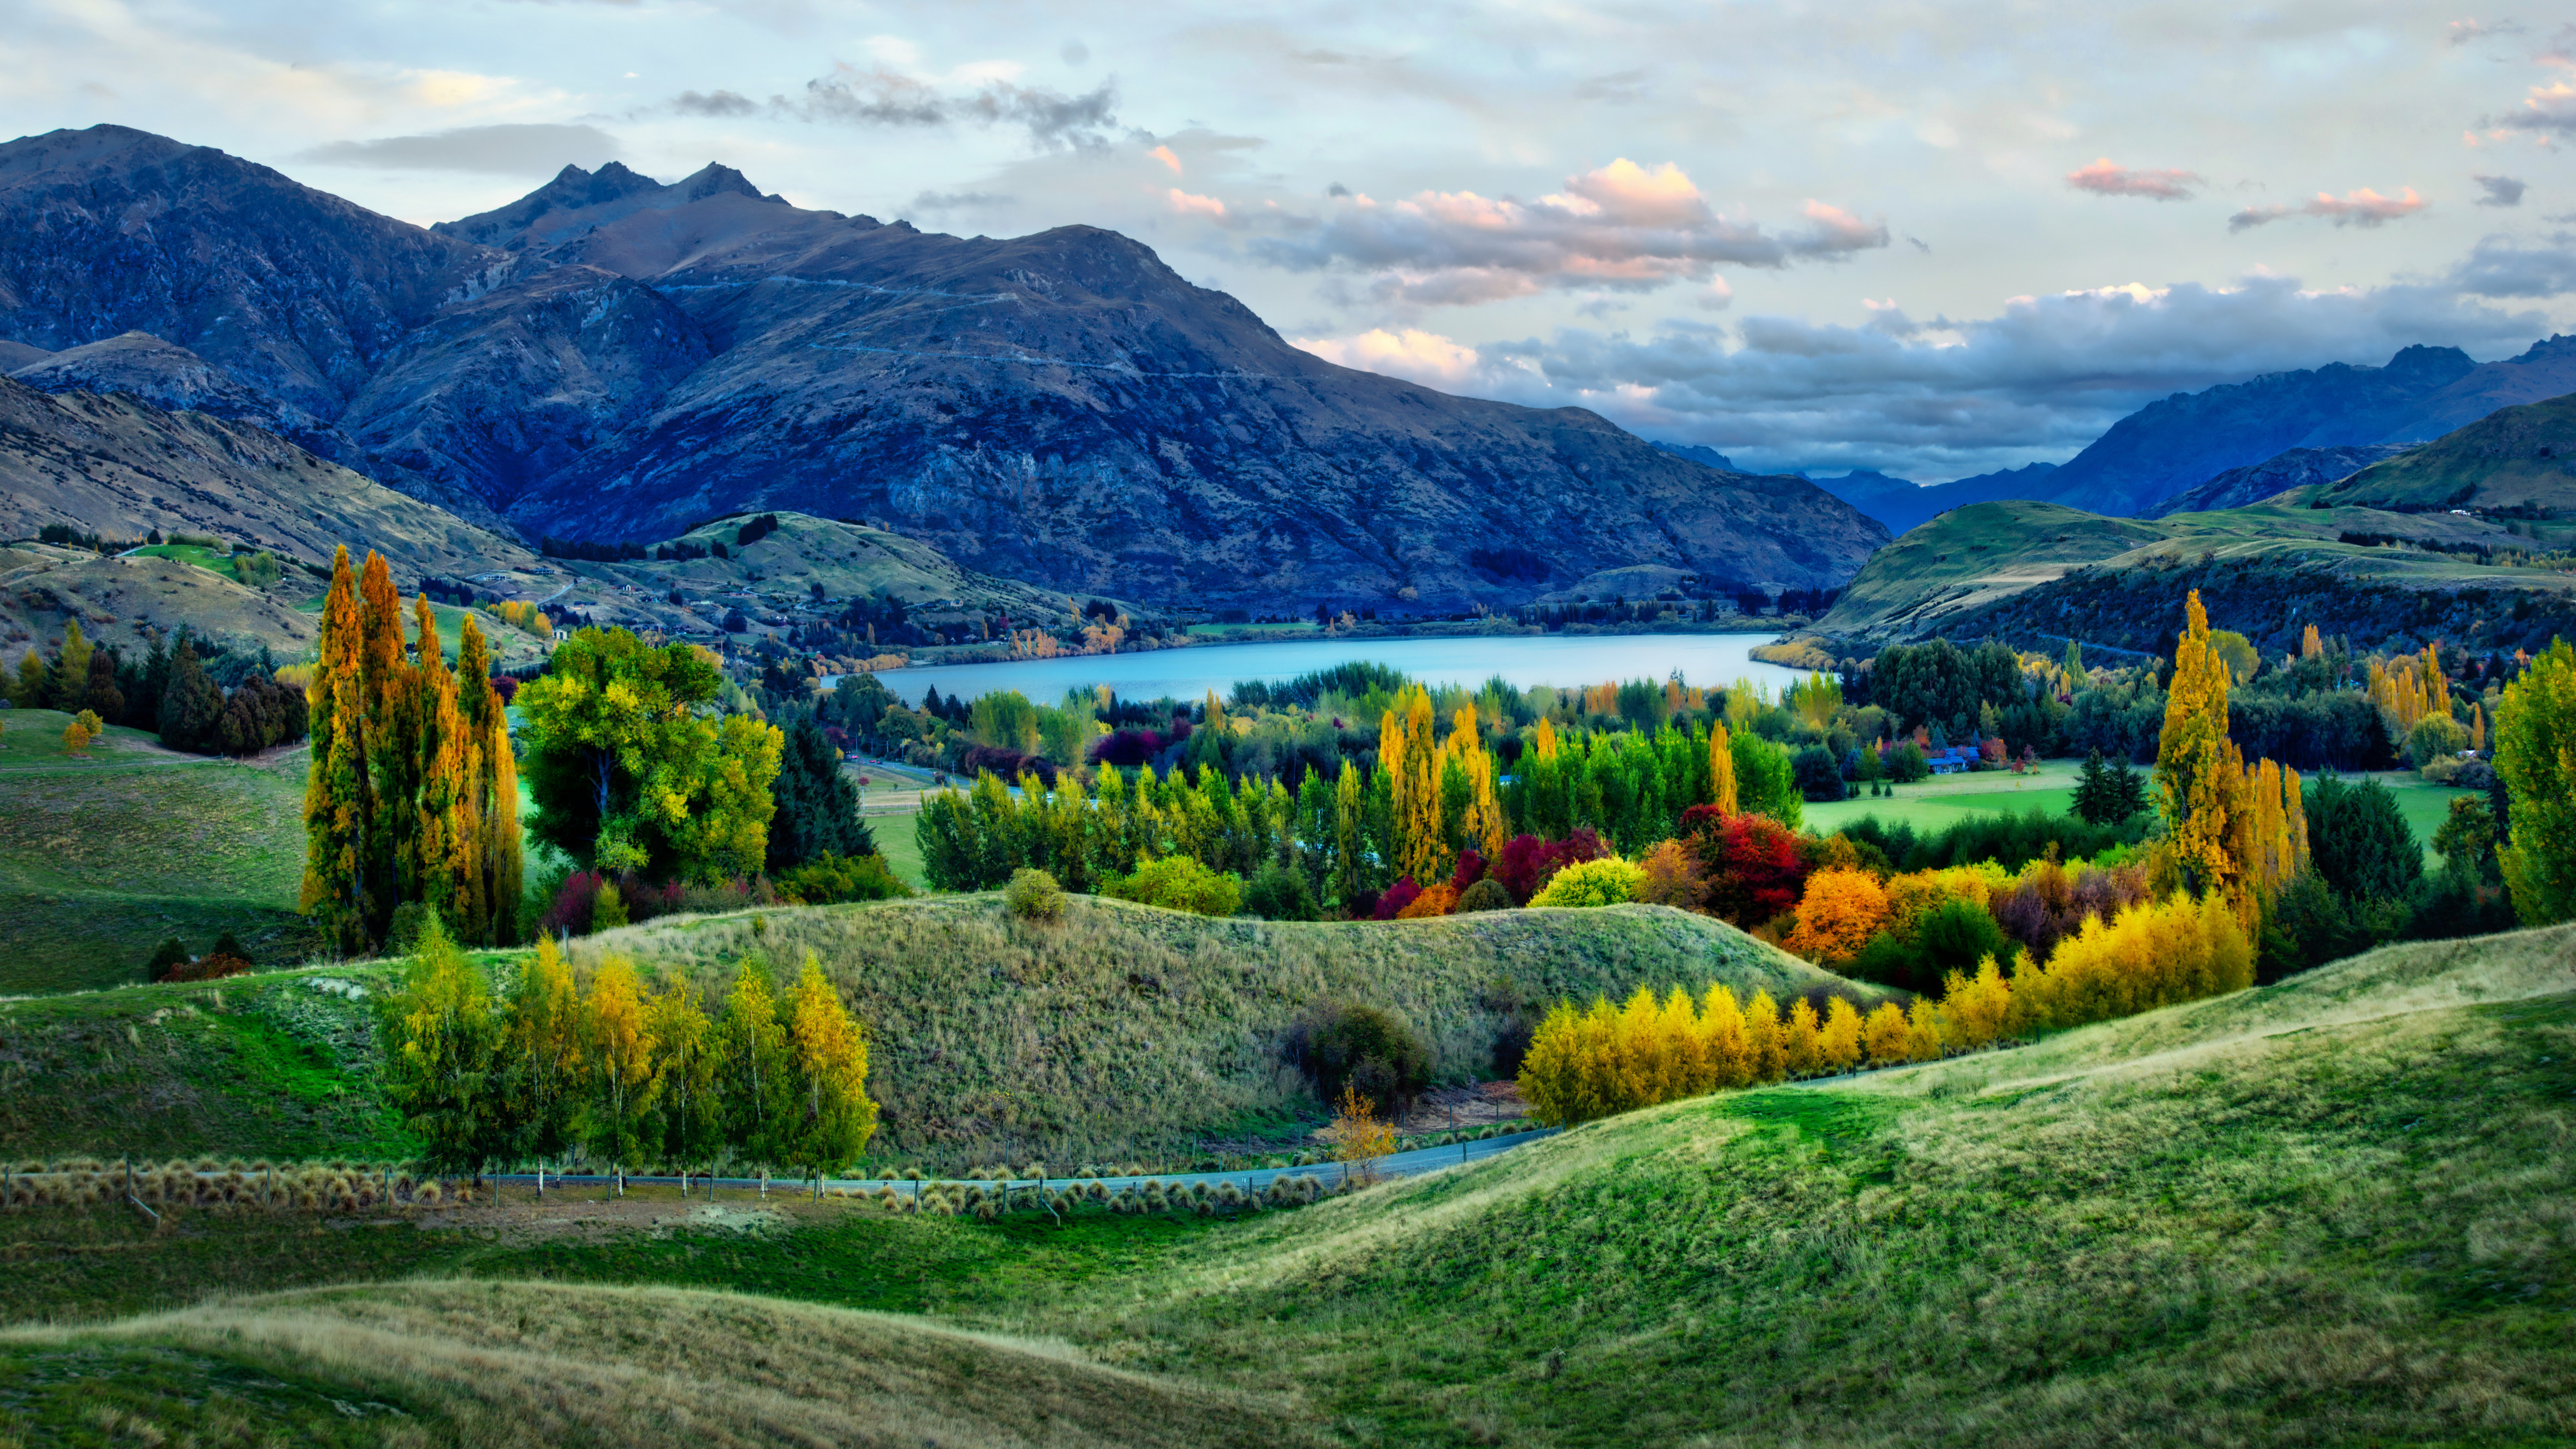 Trey Ratcliff New Zealand Queenstown Nature Trees Mountains Water Clouds Landscape 7680x4320